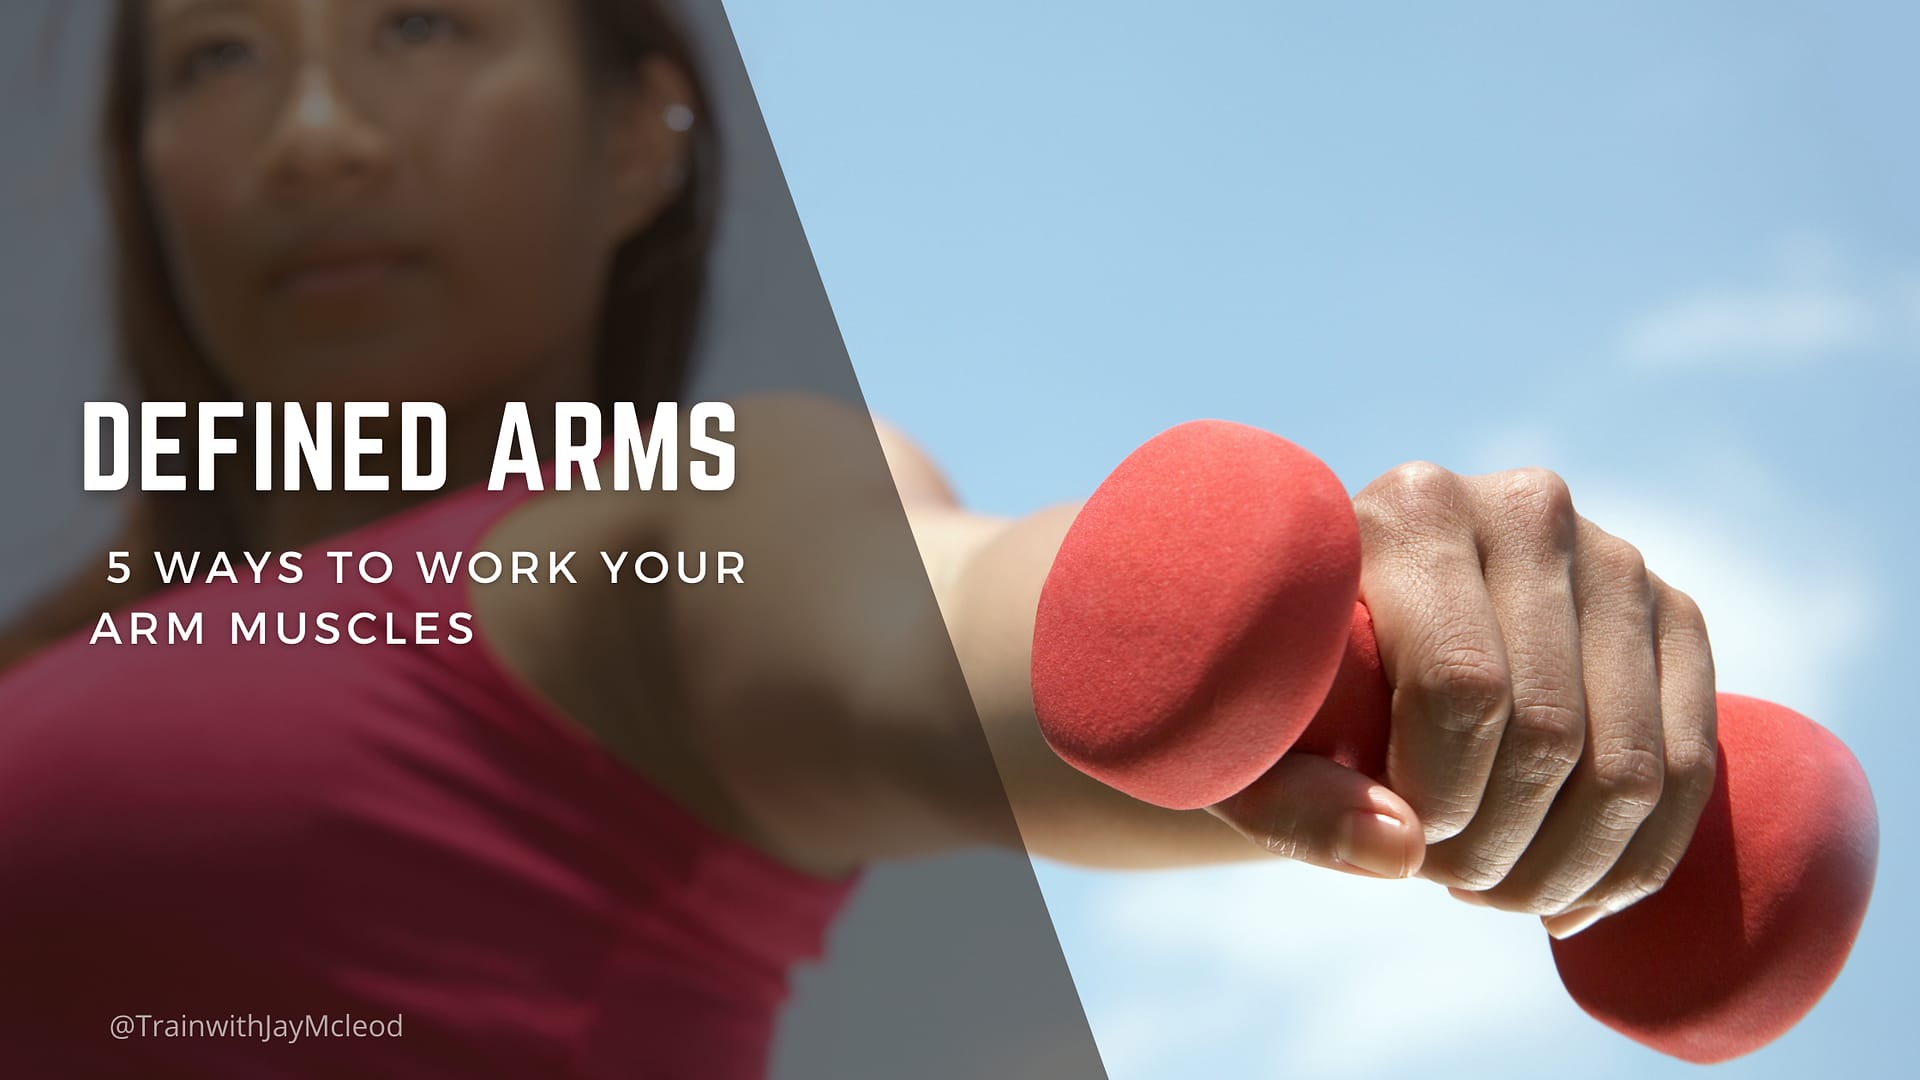 Work Your Arm Muscles | Personal Training in Bel Air, CA